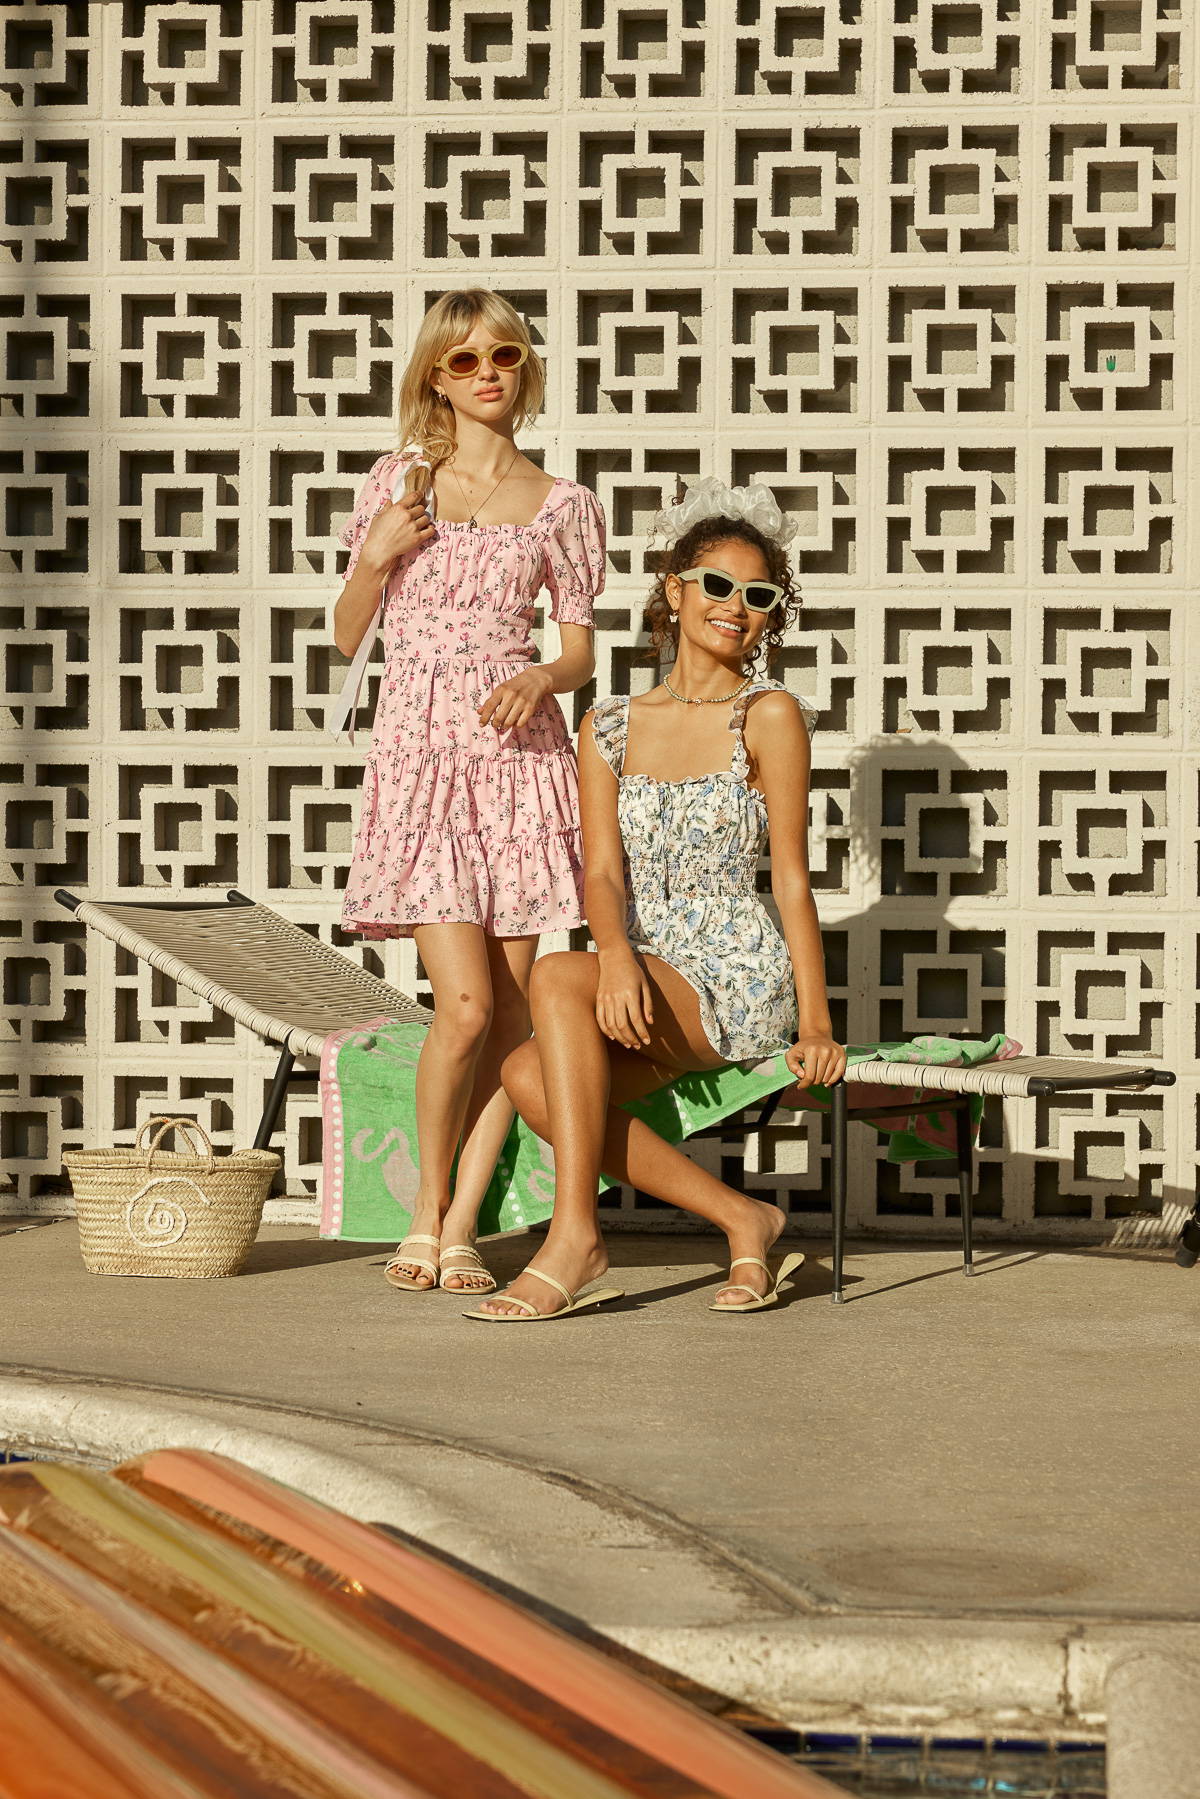 Trixxi Spring summer dress up getting ready to go to the pool in pink floral mini dress and blue ruffle mini dress.